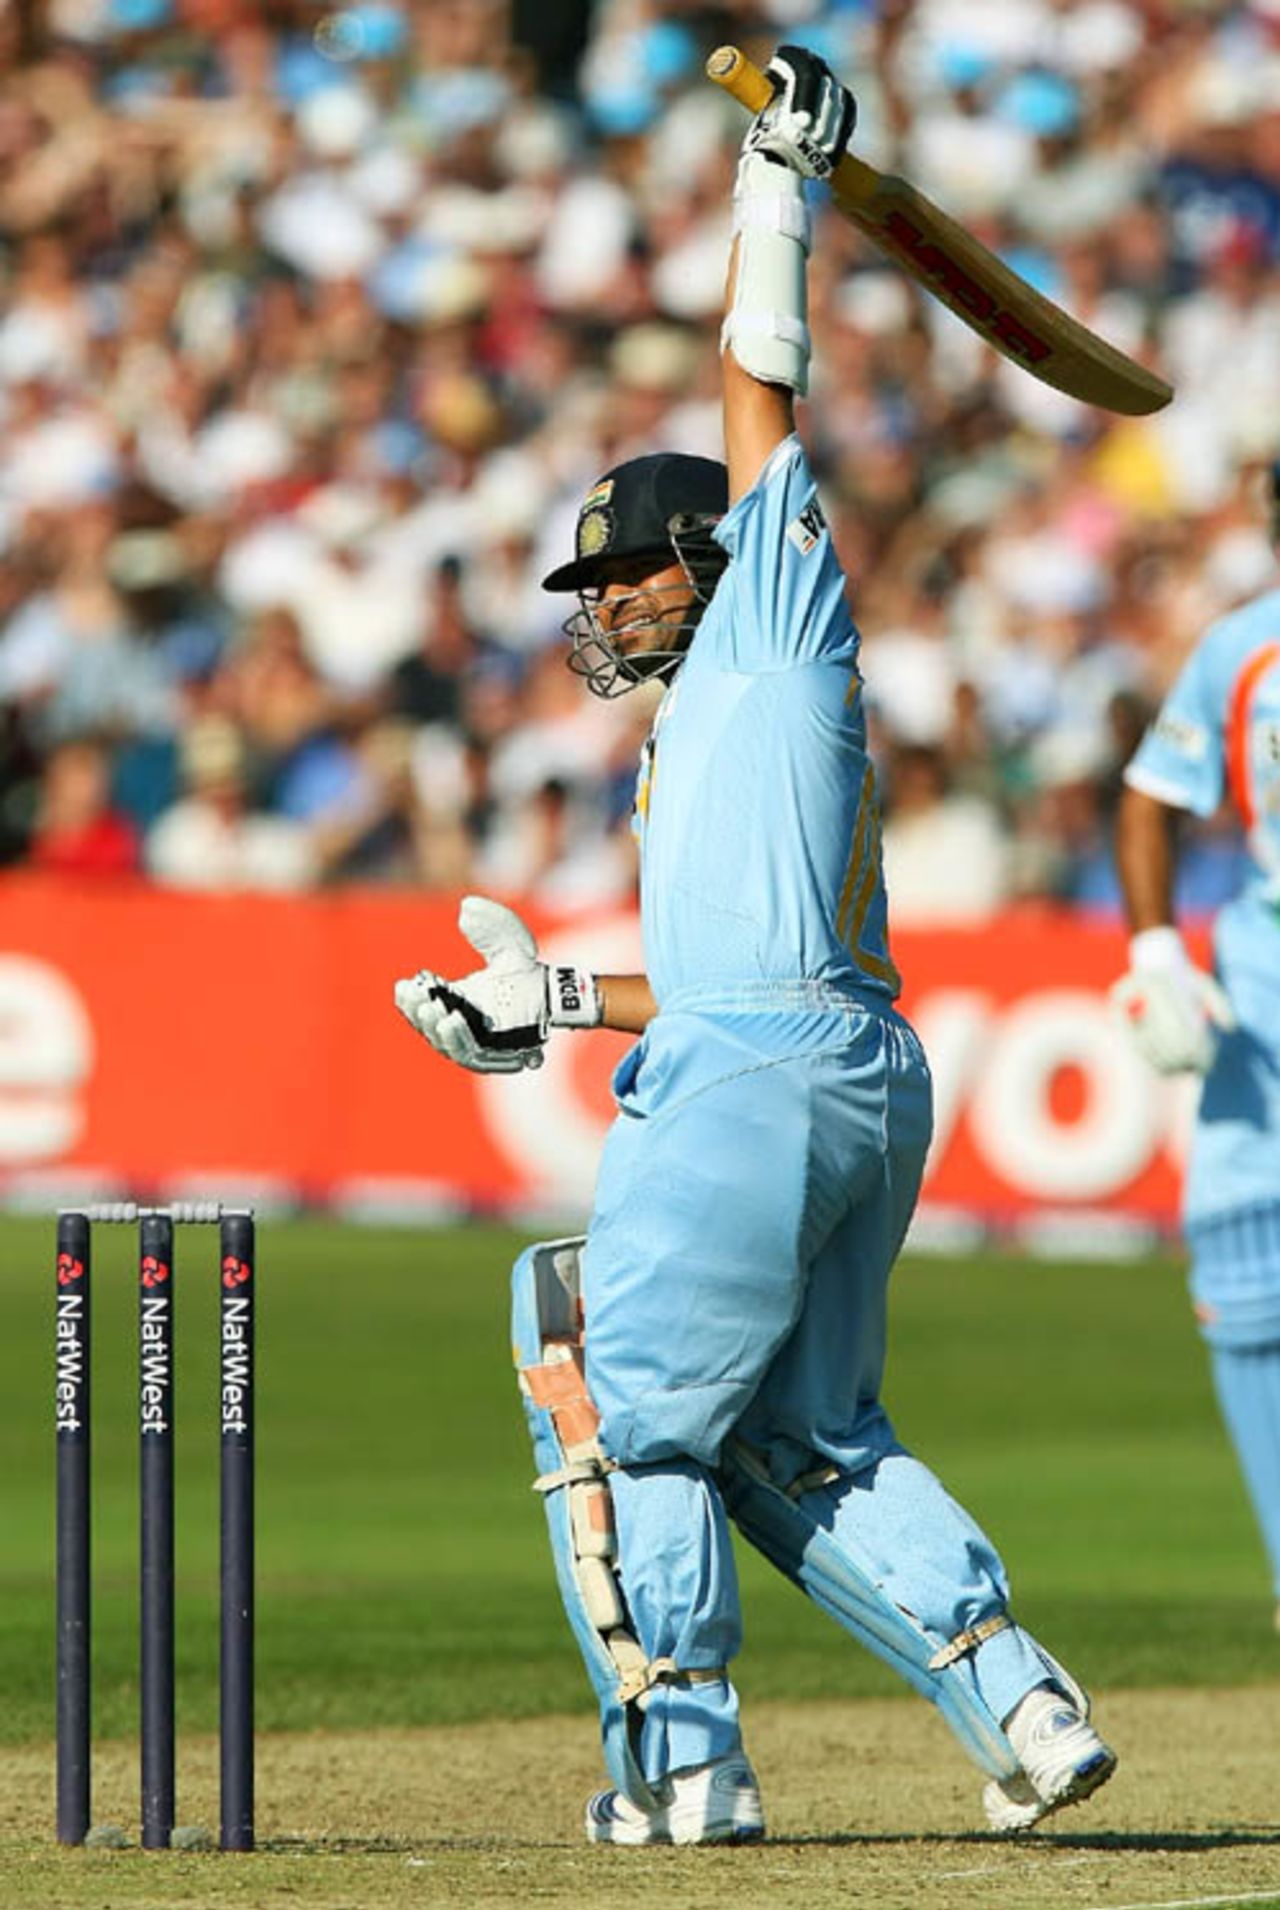 Sachin Tendulkar looks back after getting a lifter from Flintoff, which led to his dismissal, England v India, 2nd ODI, Bristol, August 24, 2007